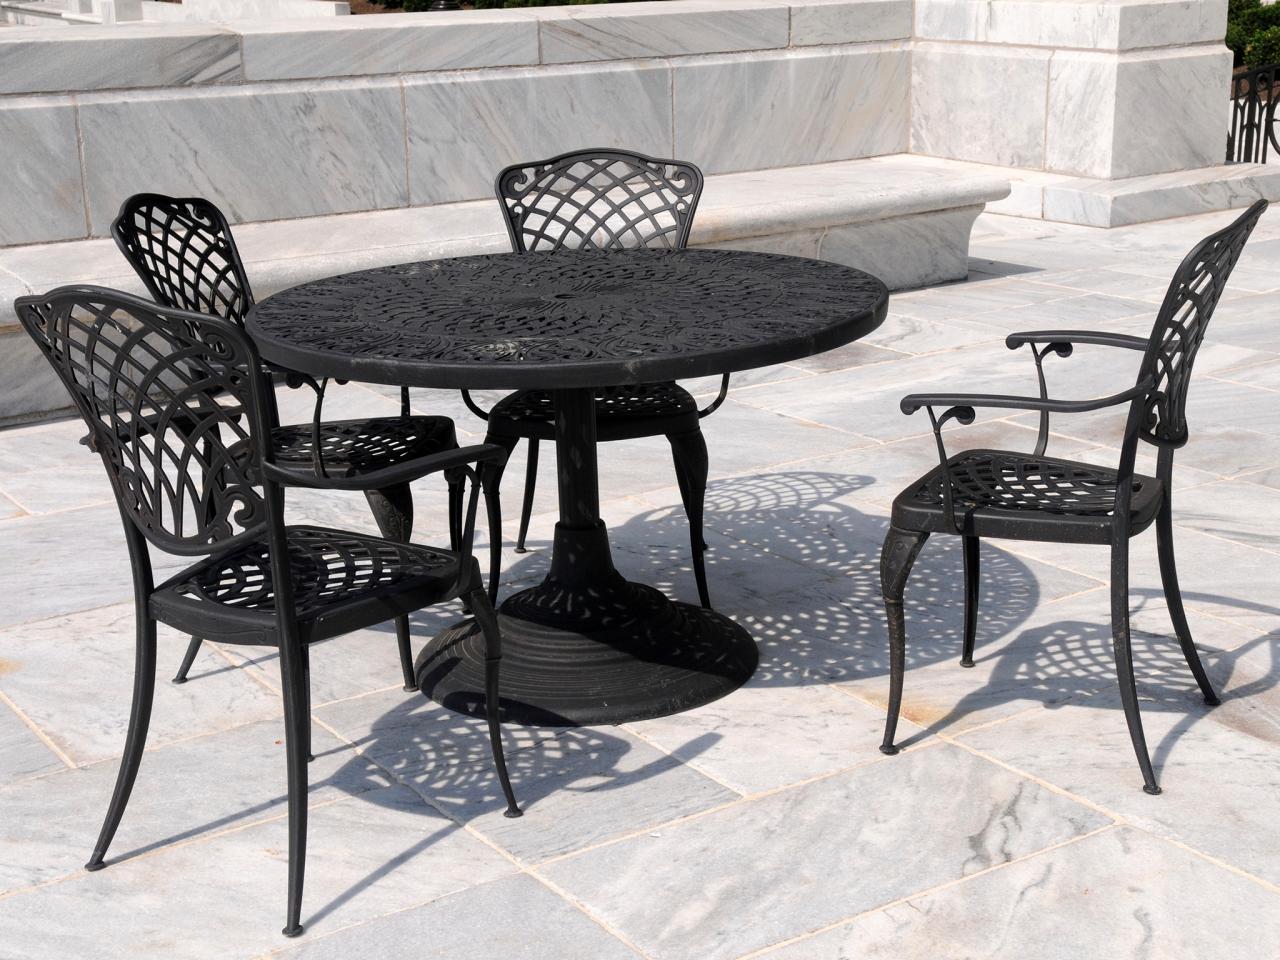 Wrought Iron Patio Furniture – Class That Endures forever